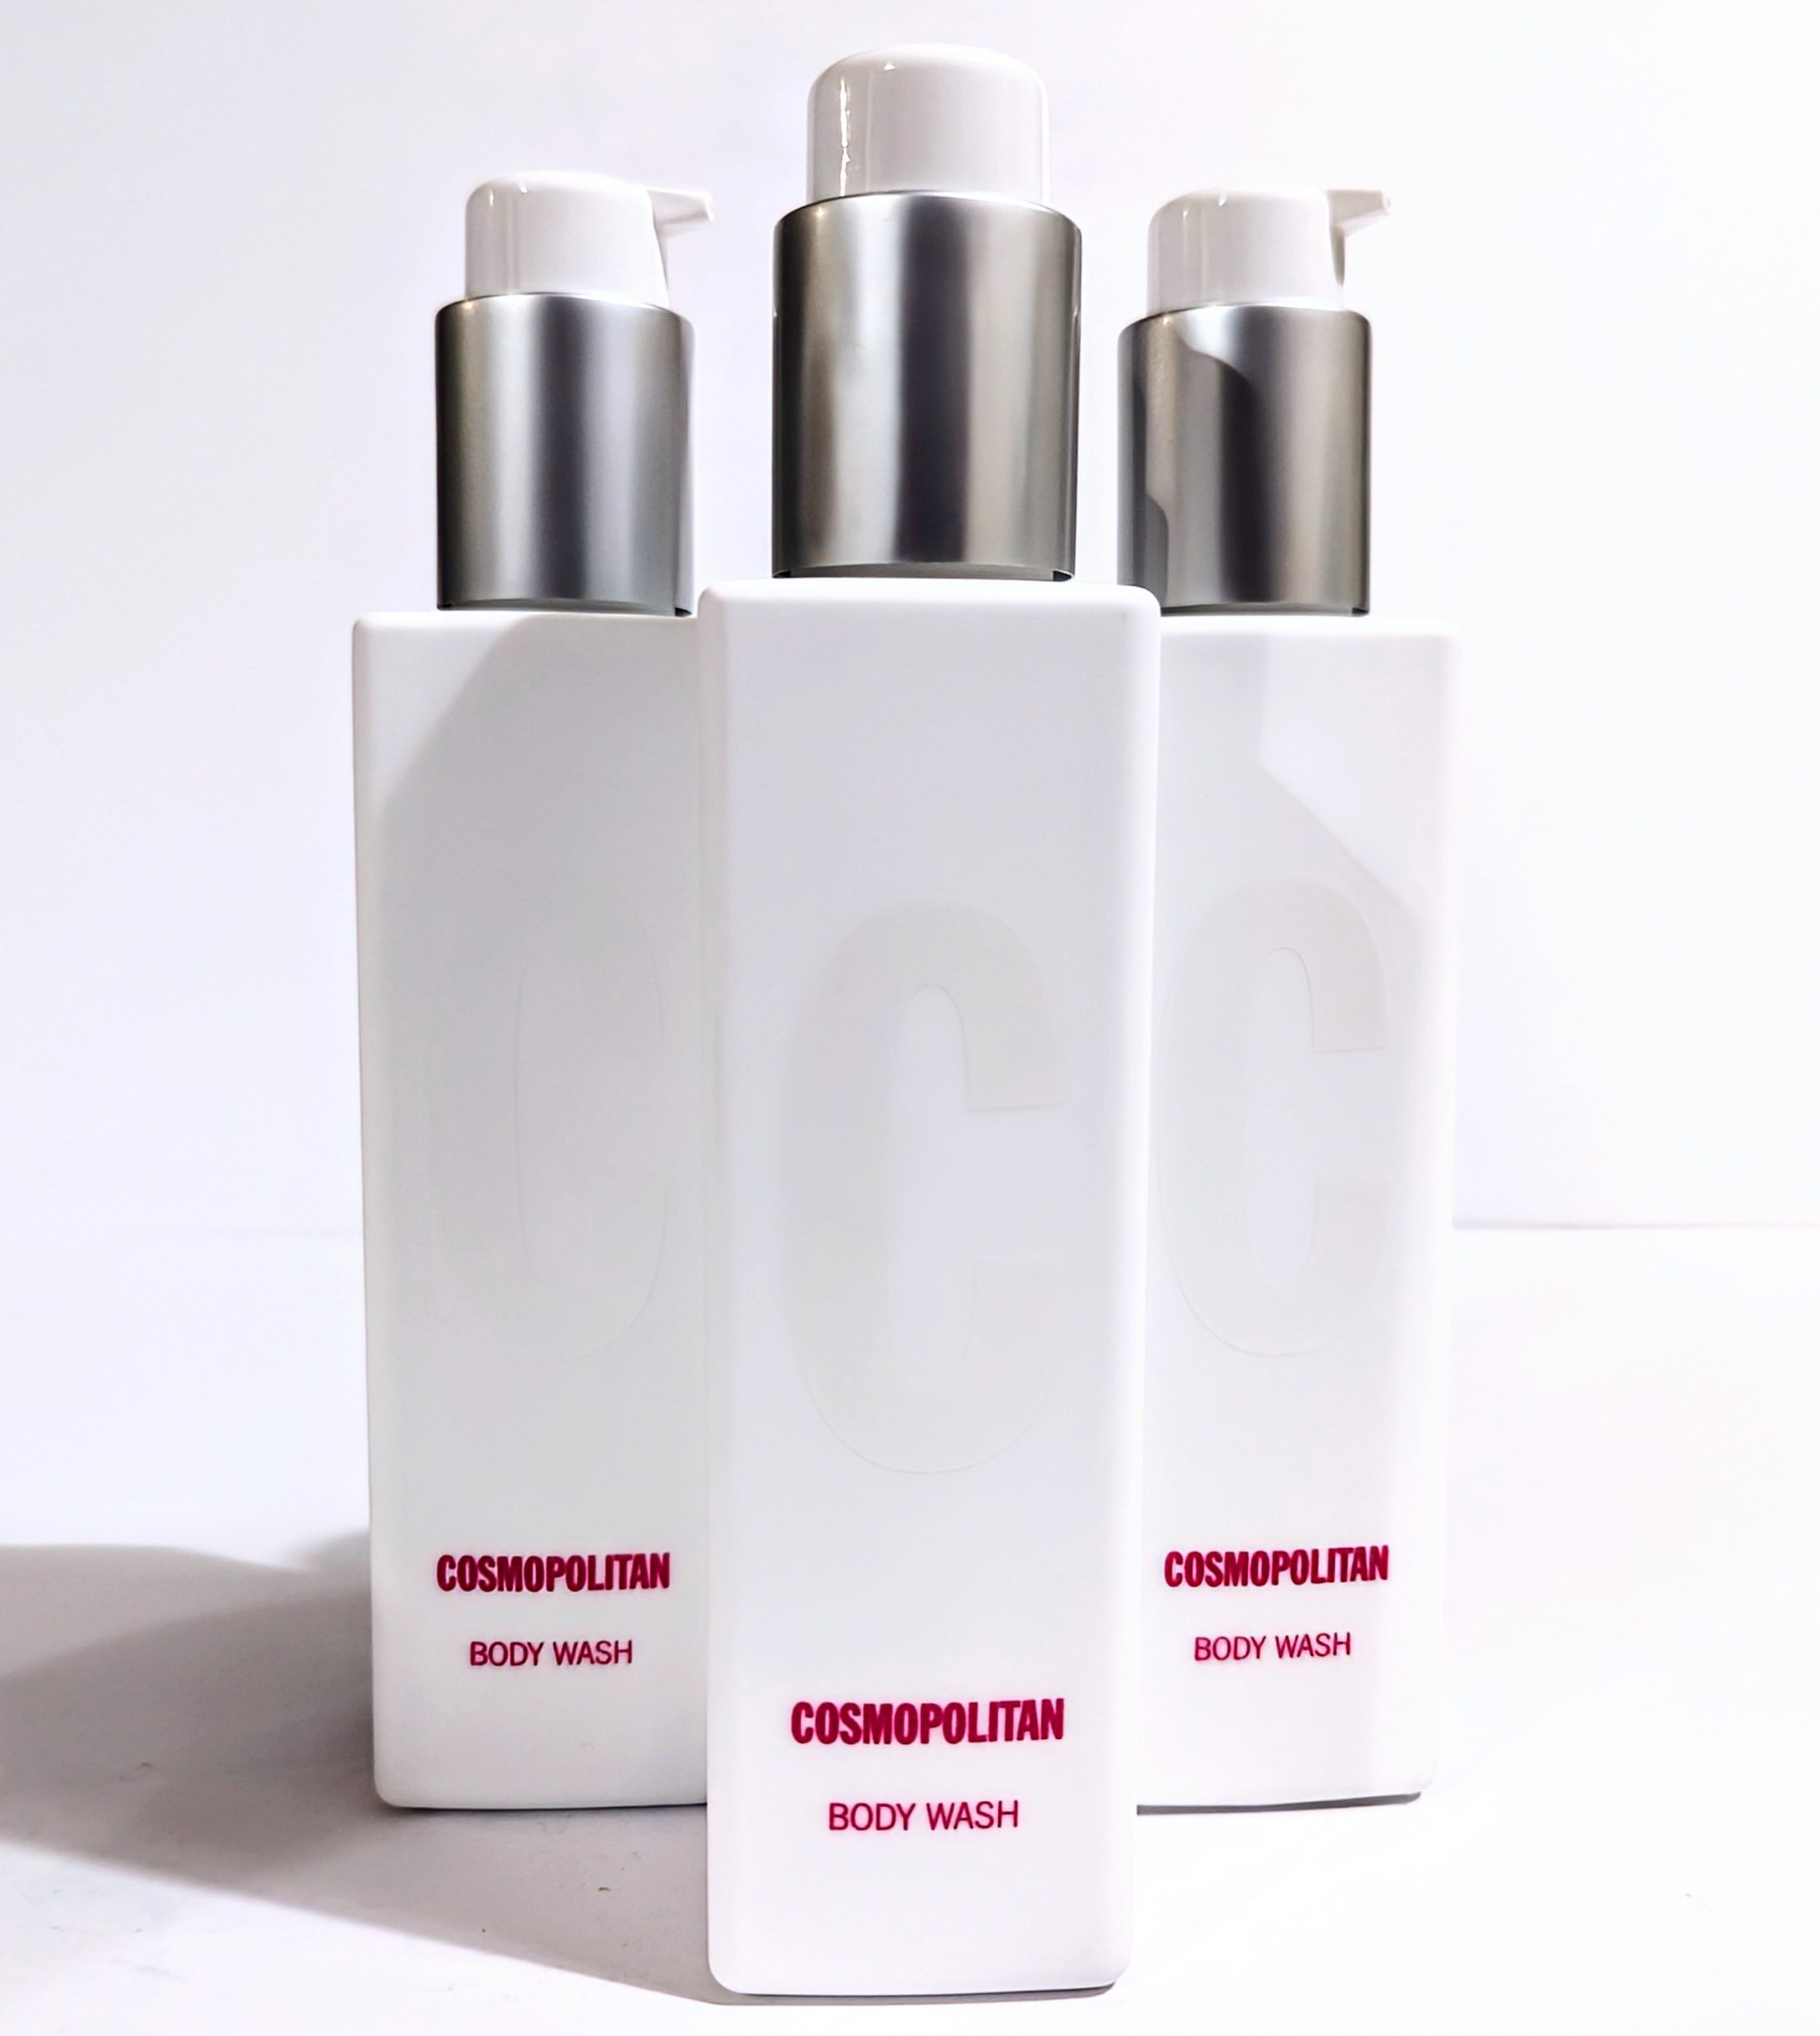 A white, rectangular bottle labeled “Cosmopolitan Body Wash” with a pump dispenser, standing on a smooth surface. Three bottles are arranged closely together.